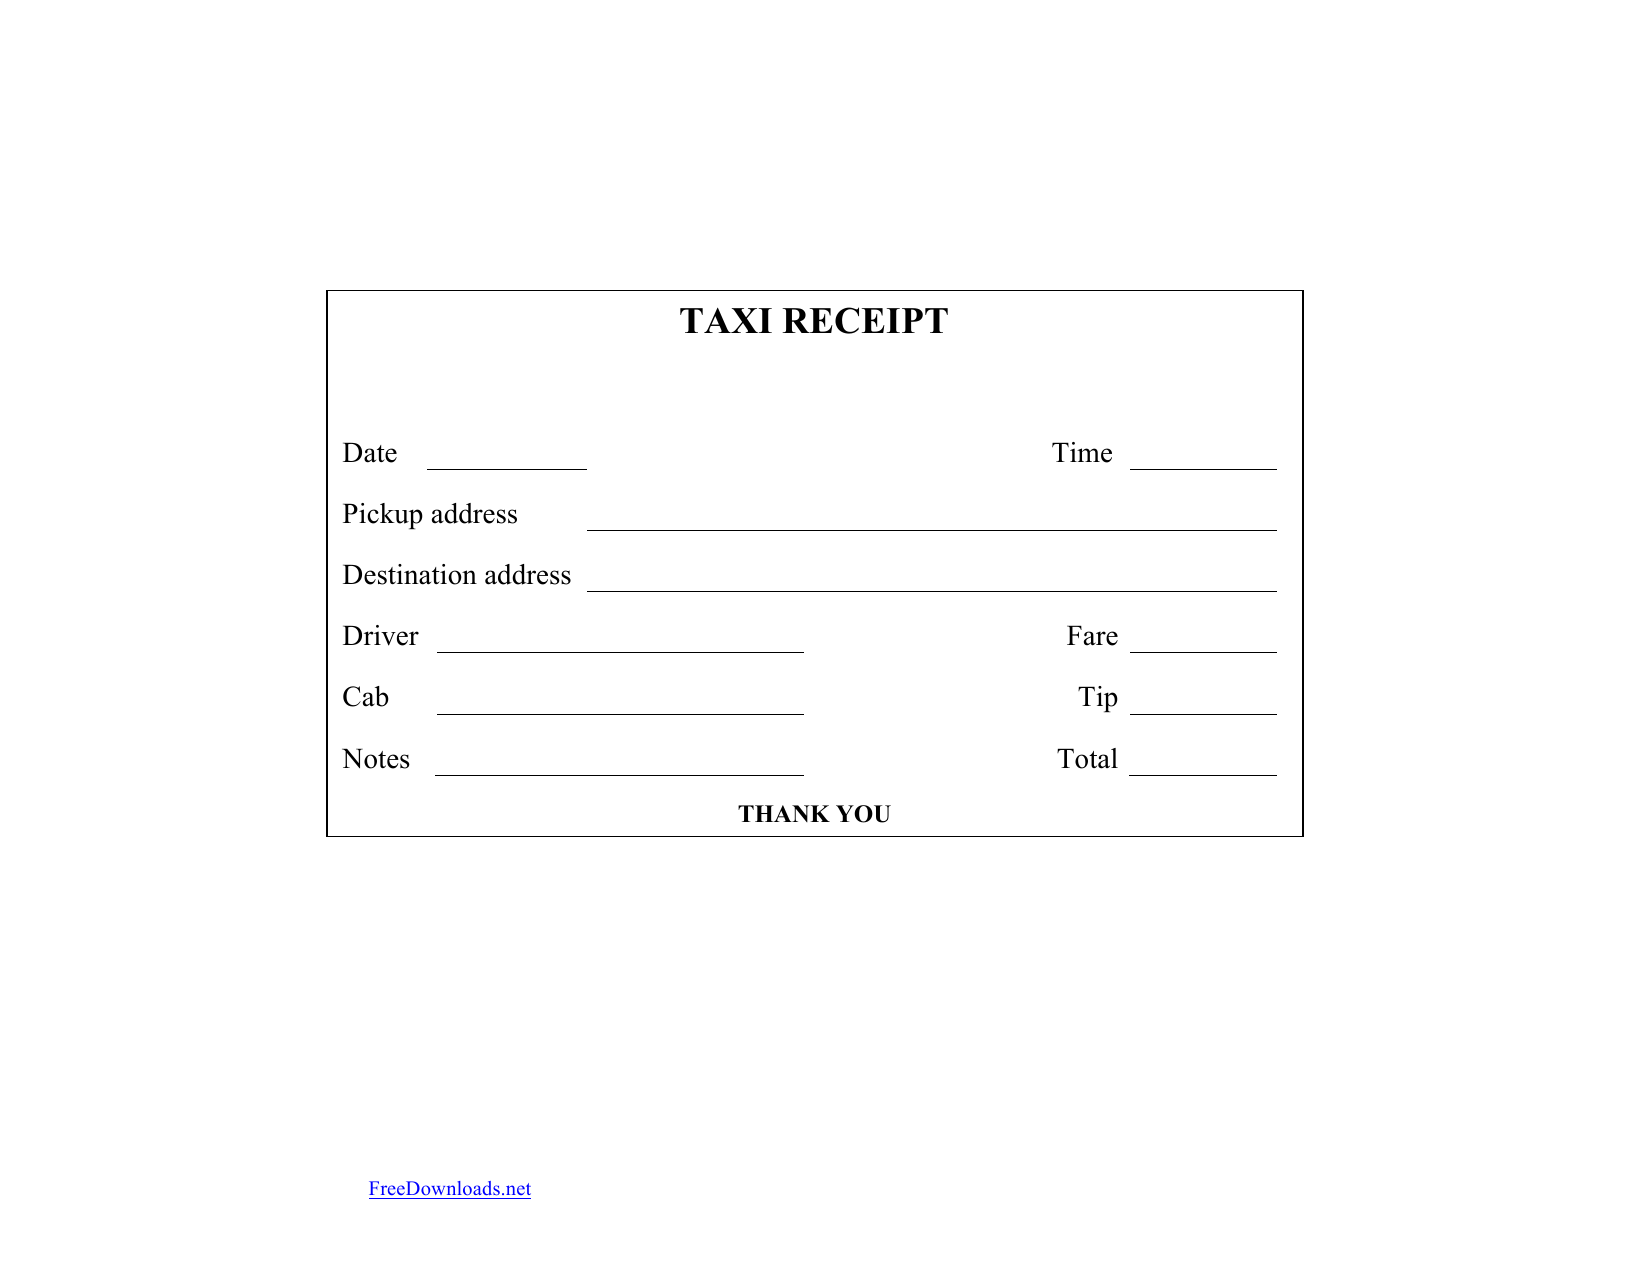 Download Blank Printable Taxi/Cab Receipt Template  Excel  PDF  Intended For Blank Taxi Receipt Template